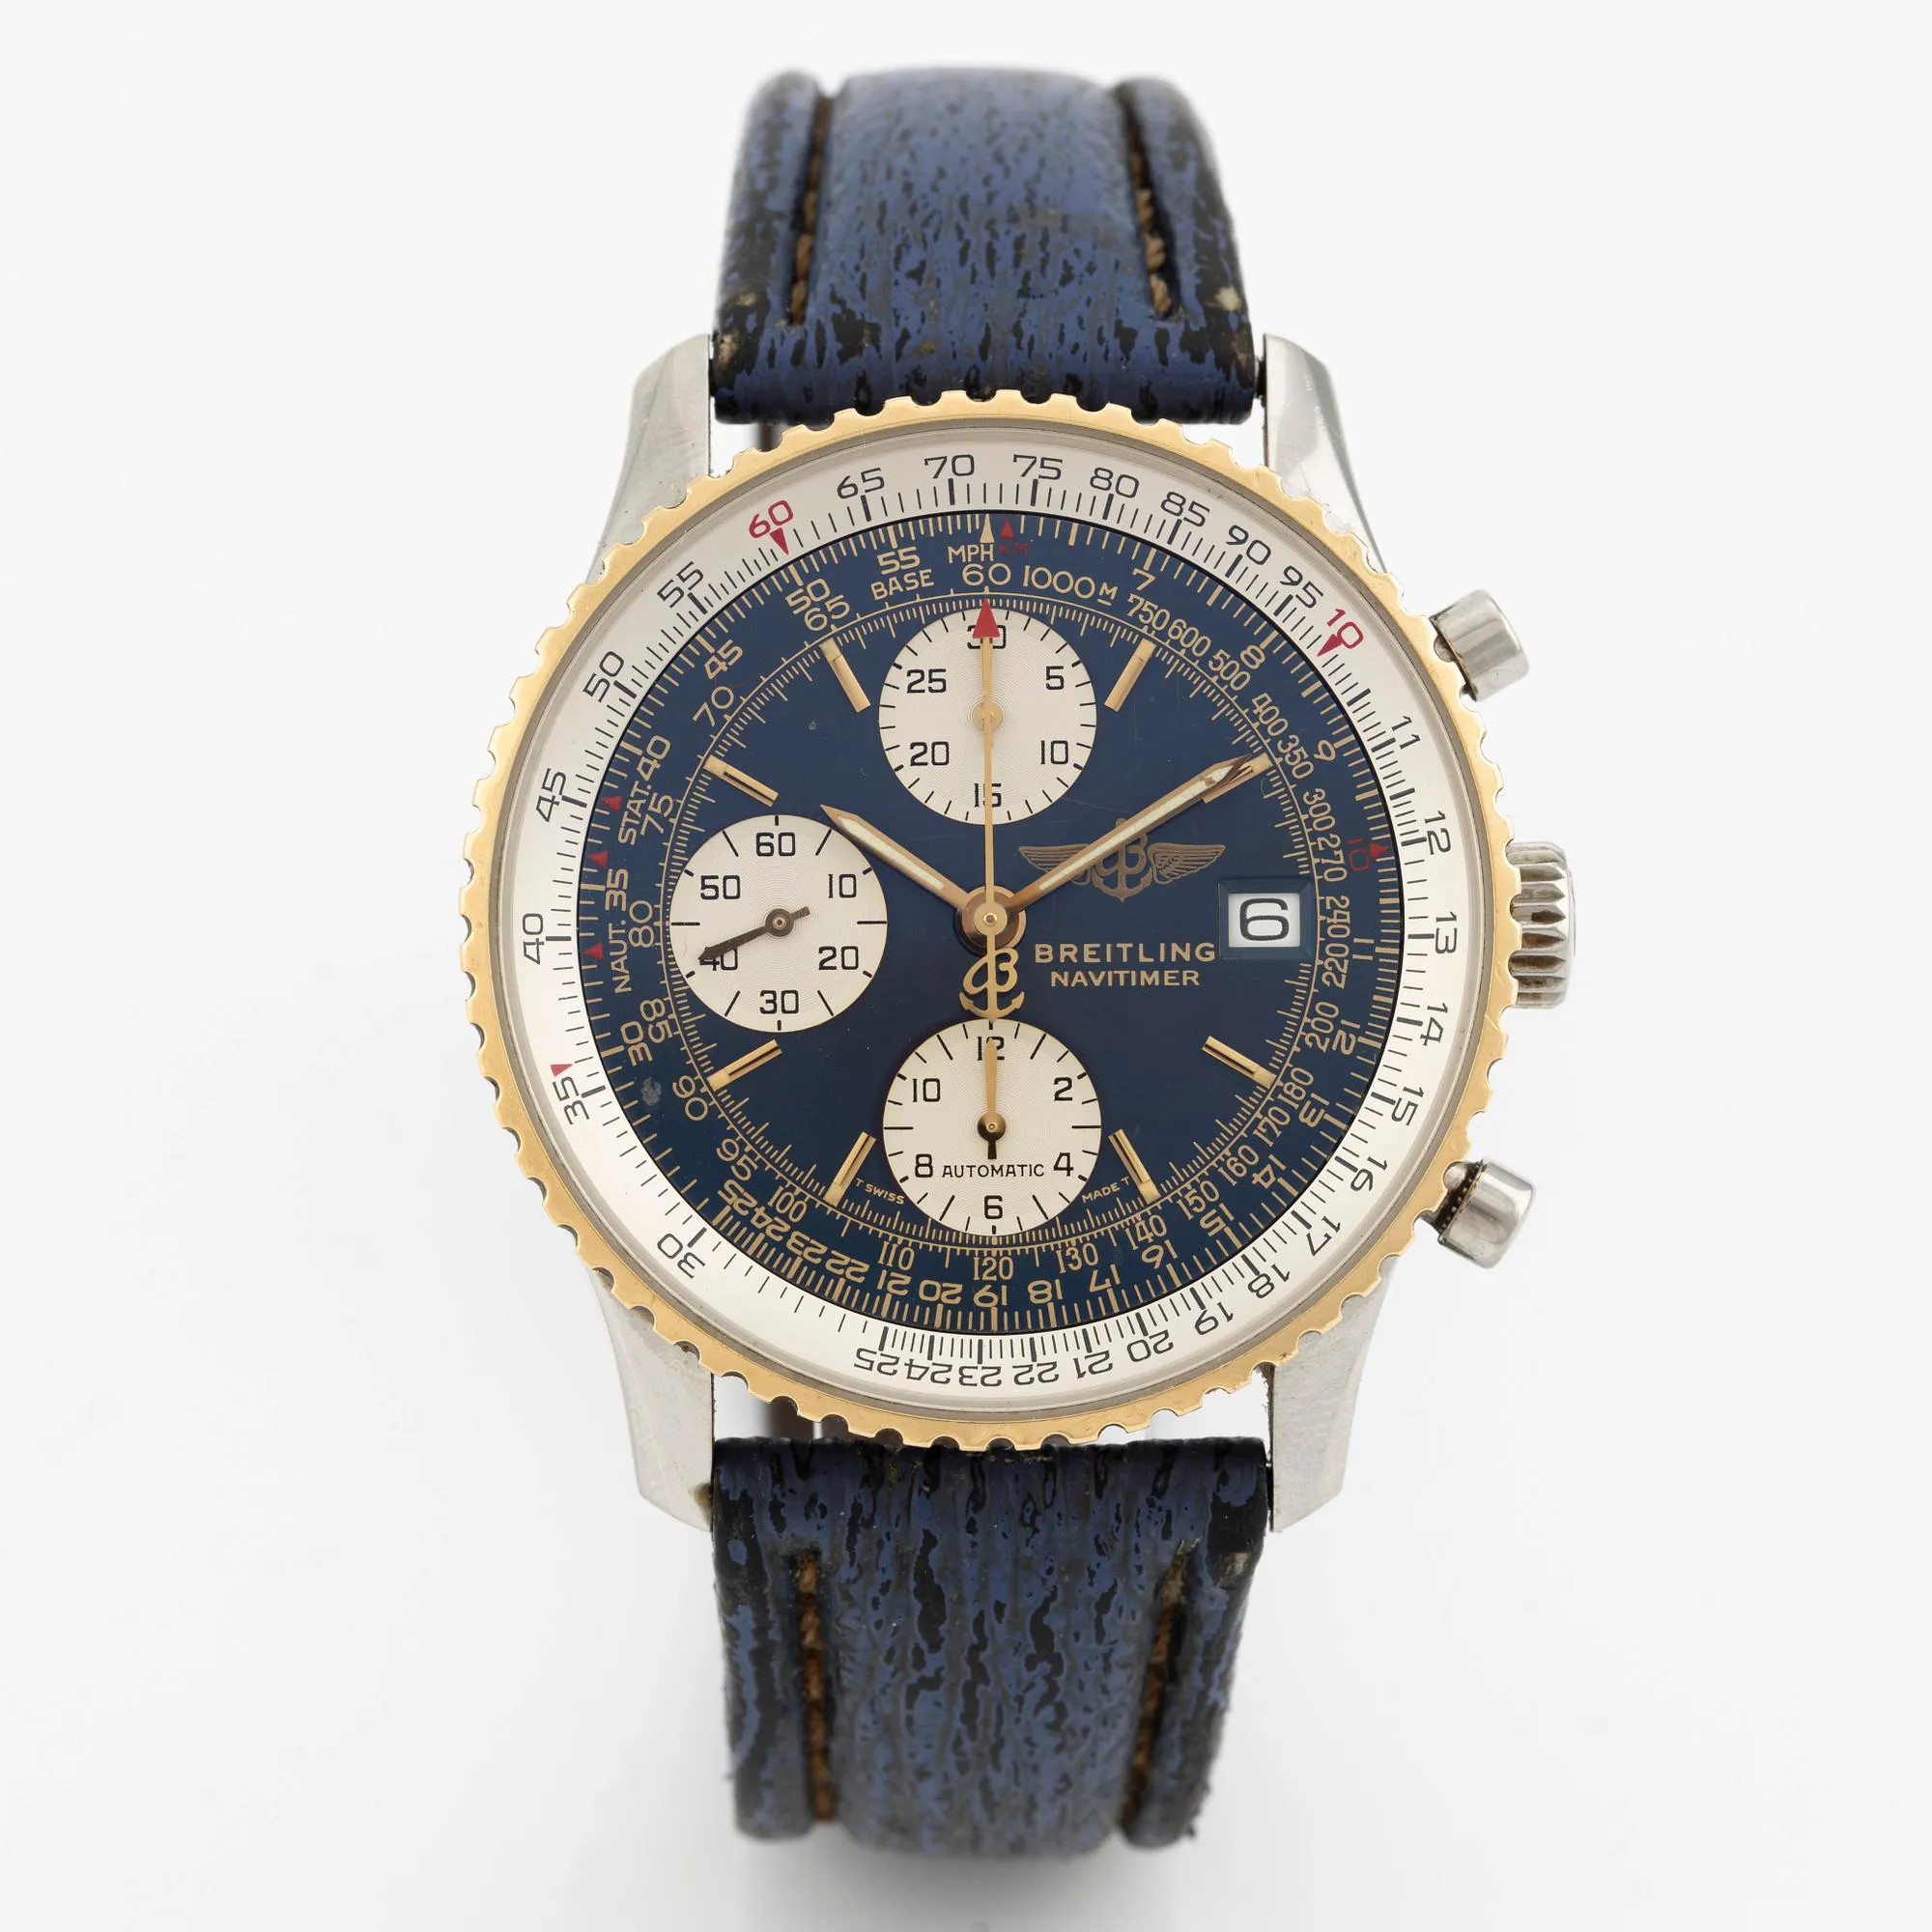 Breitling Navitimer D13022 41.5mm Yellow gold and stainless steel